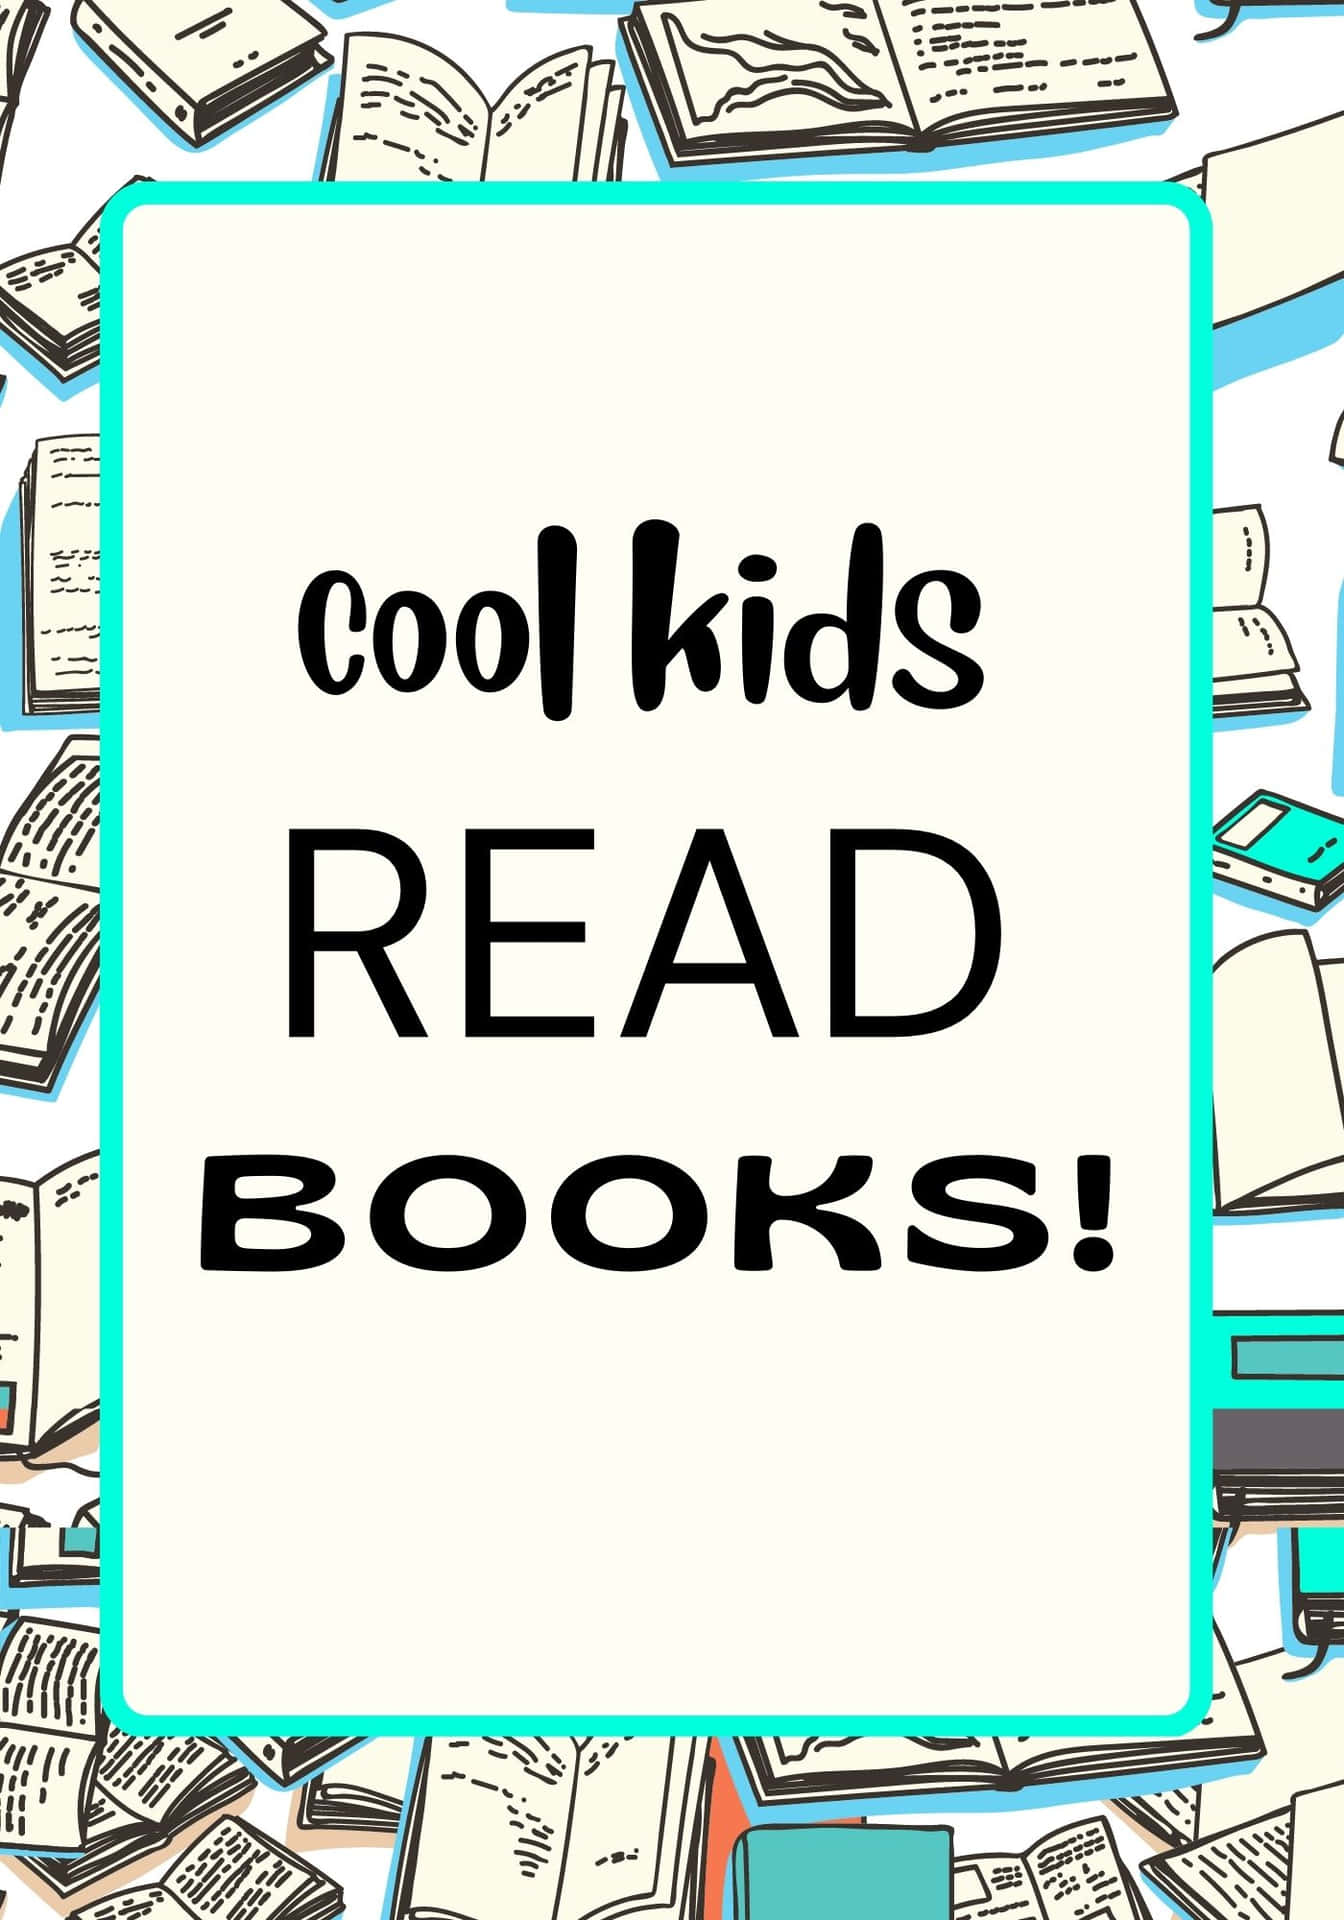 Cool Kids Read Books Background